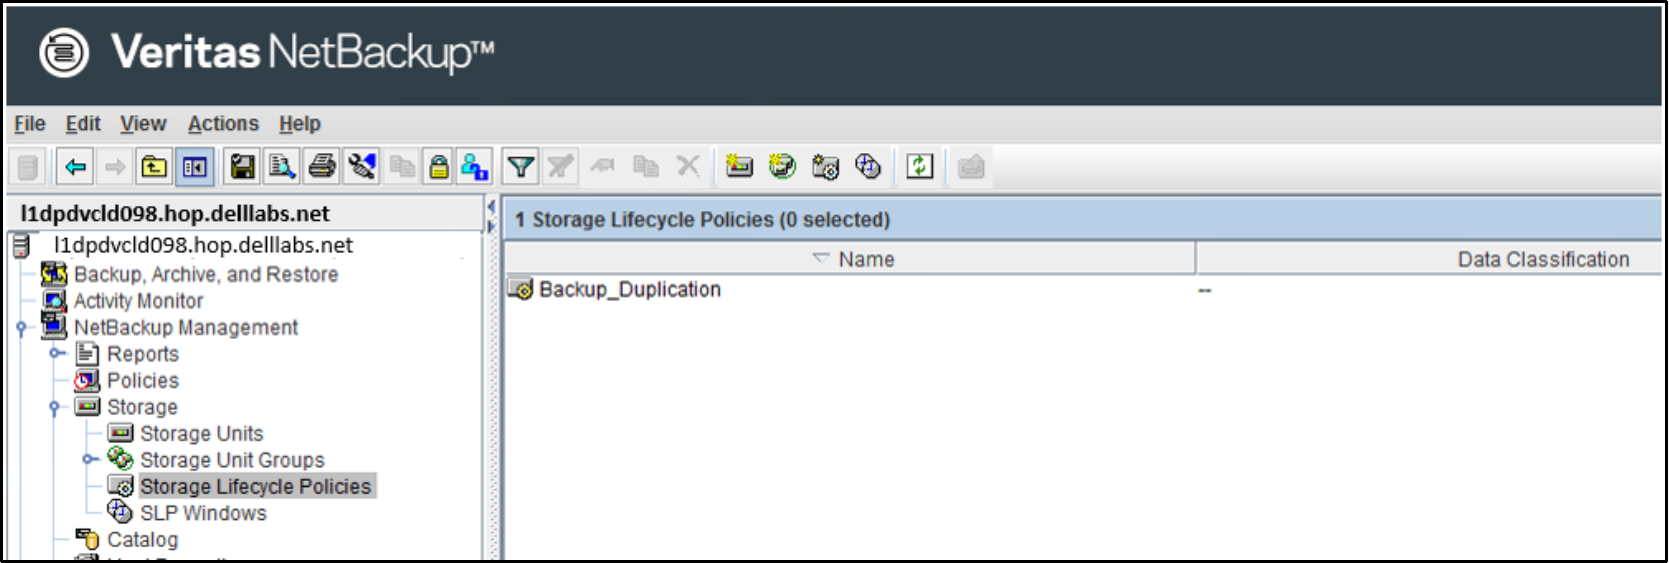 The image shows the SLP is ready for for performing backup and duplication.